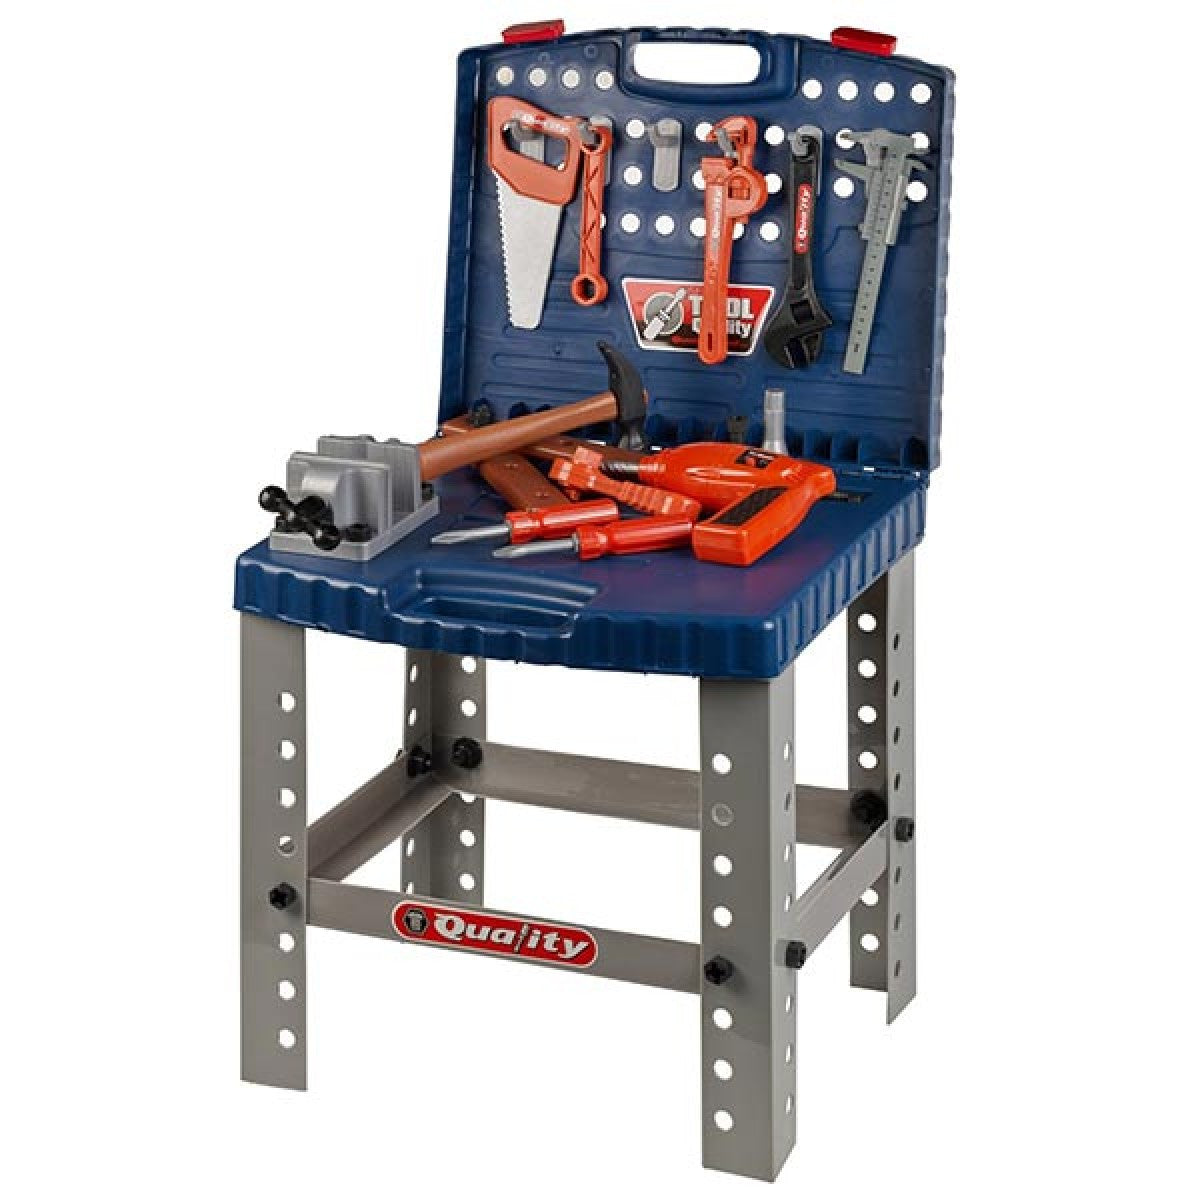 Tool Bench Play Set Age 3 Years My Mom And Me